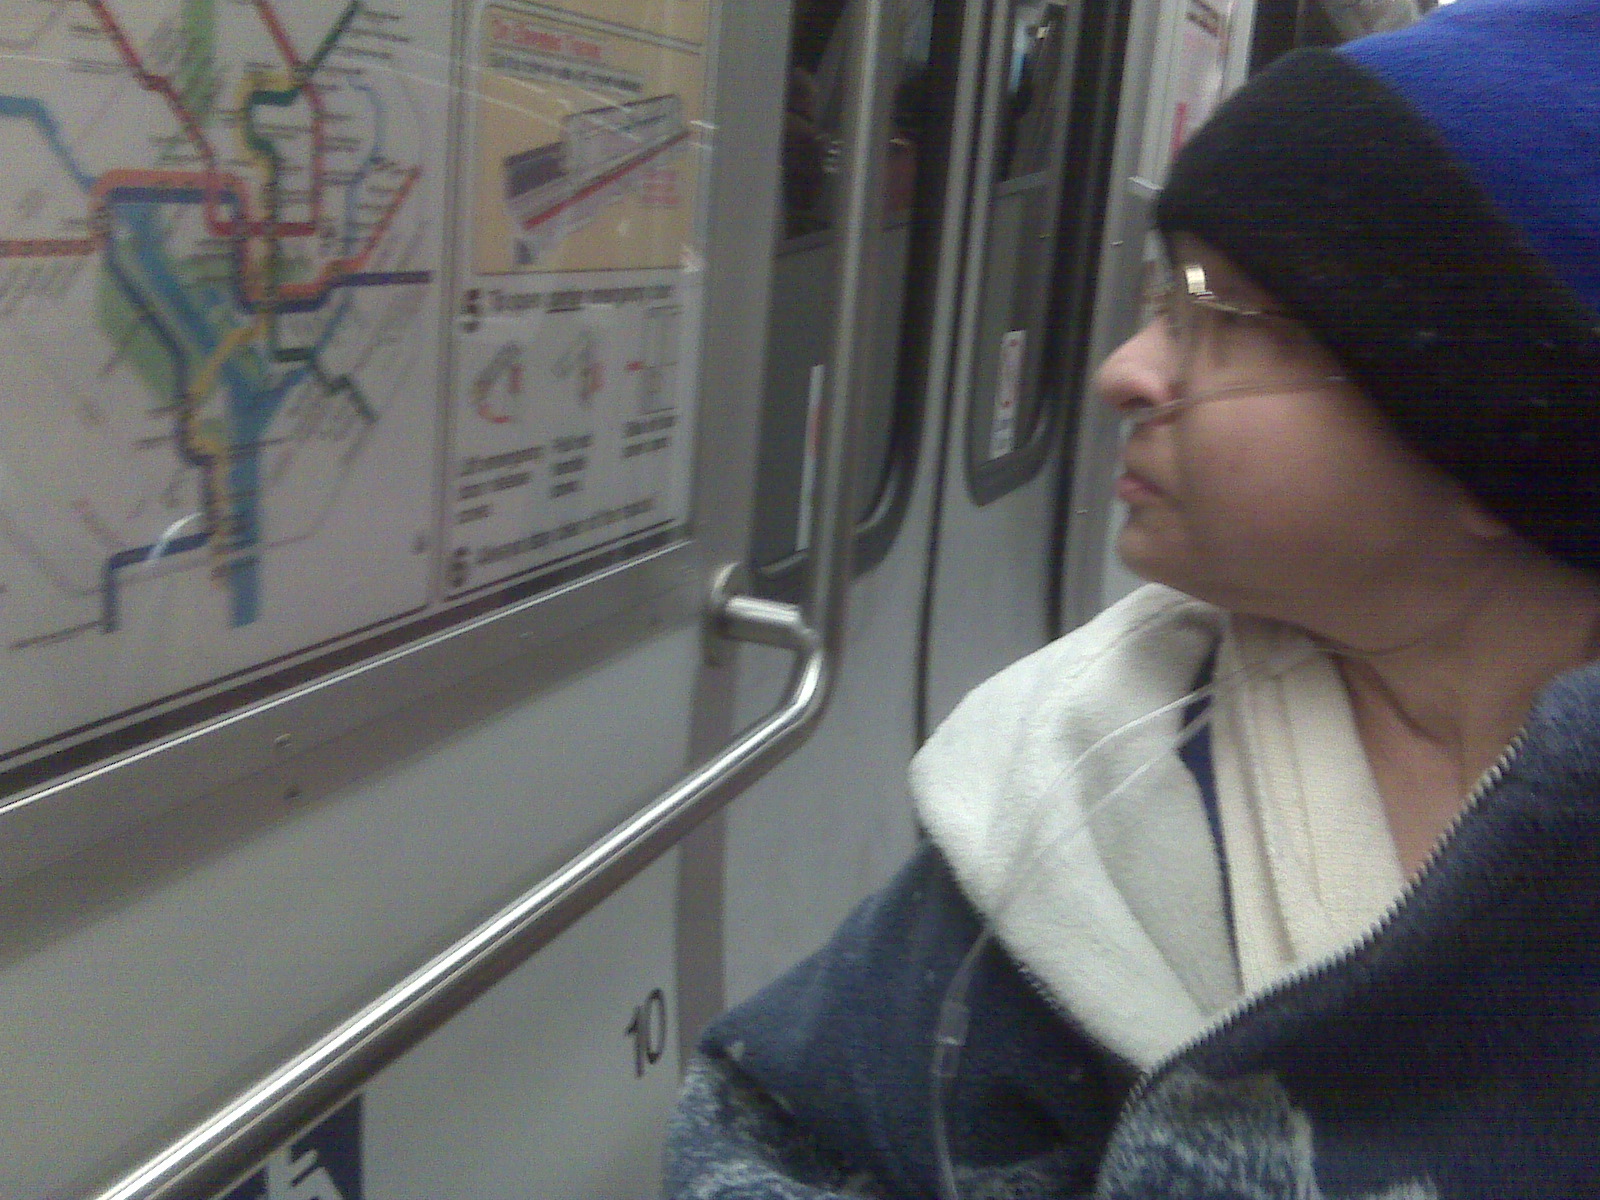 a woman wearing a blue hat looks at the train maps